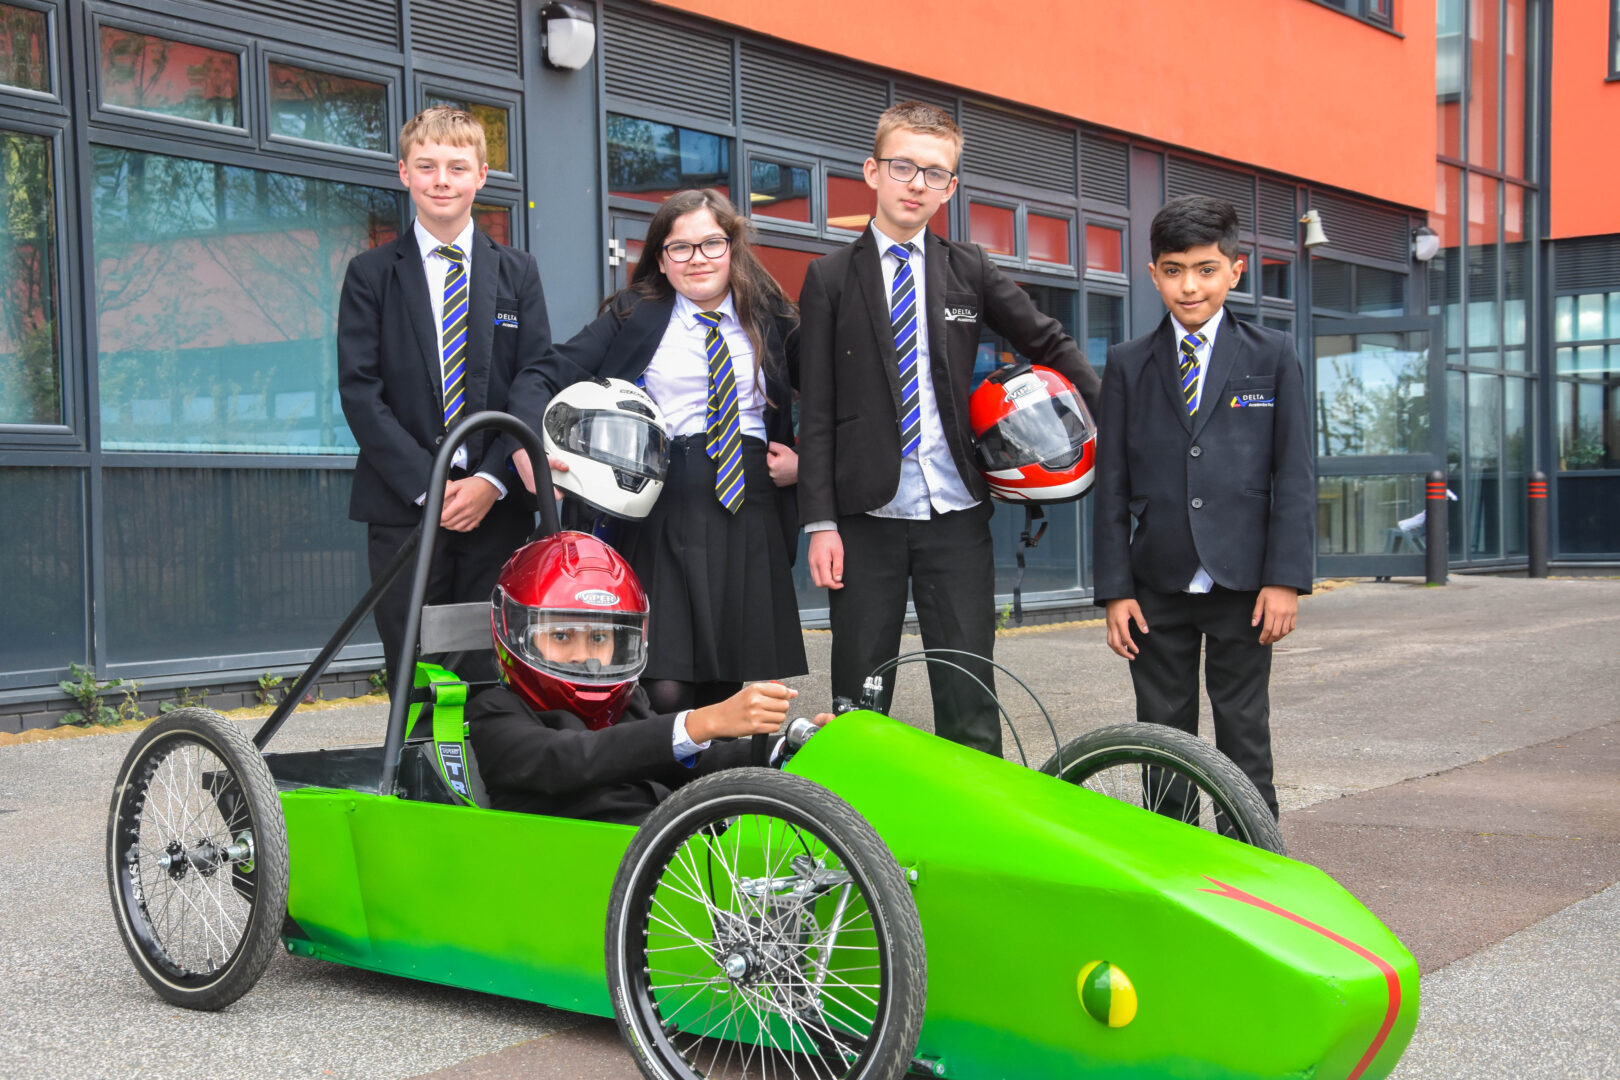 A group of school children stand in front of a school, a child sits in a green electric go kart